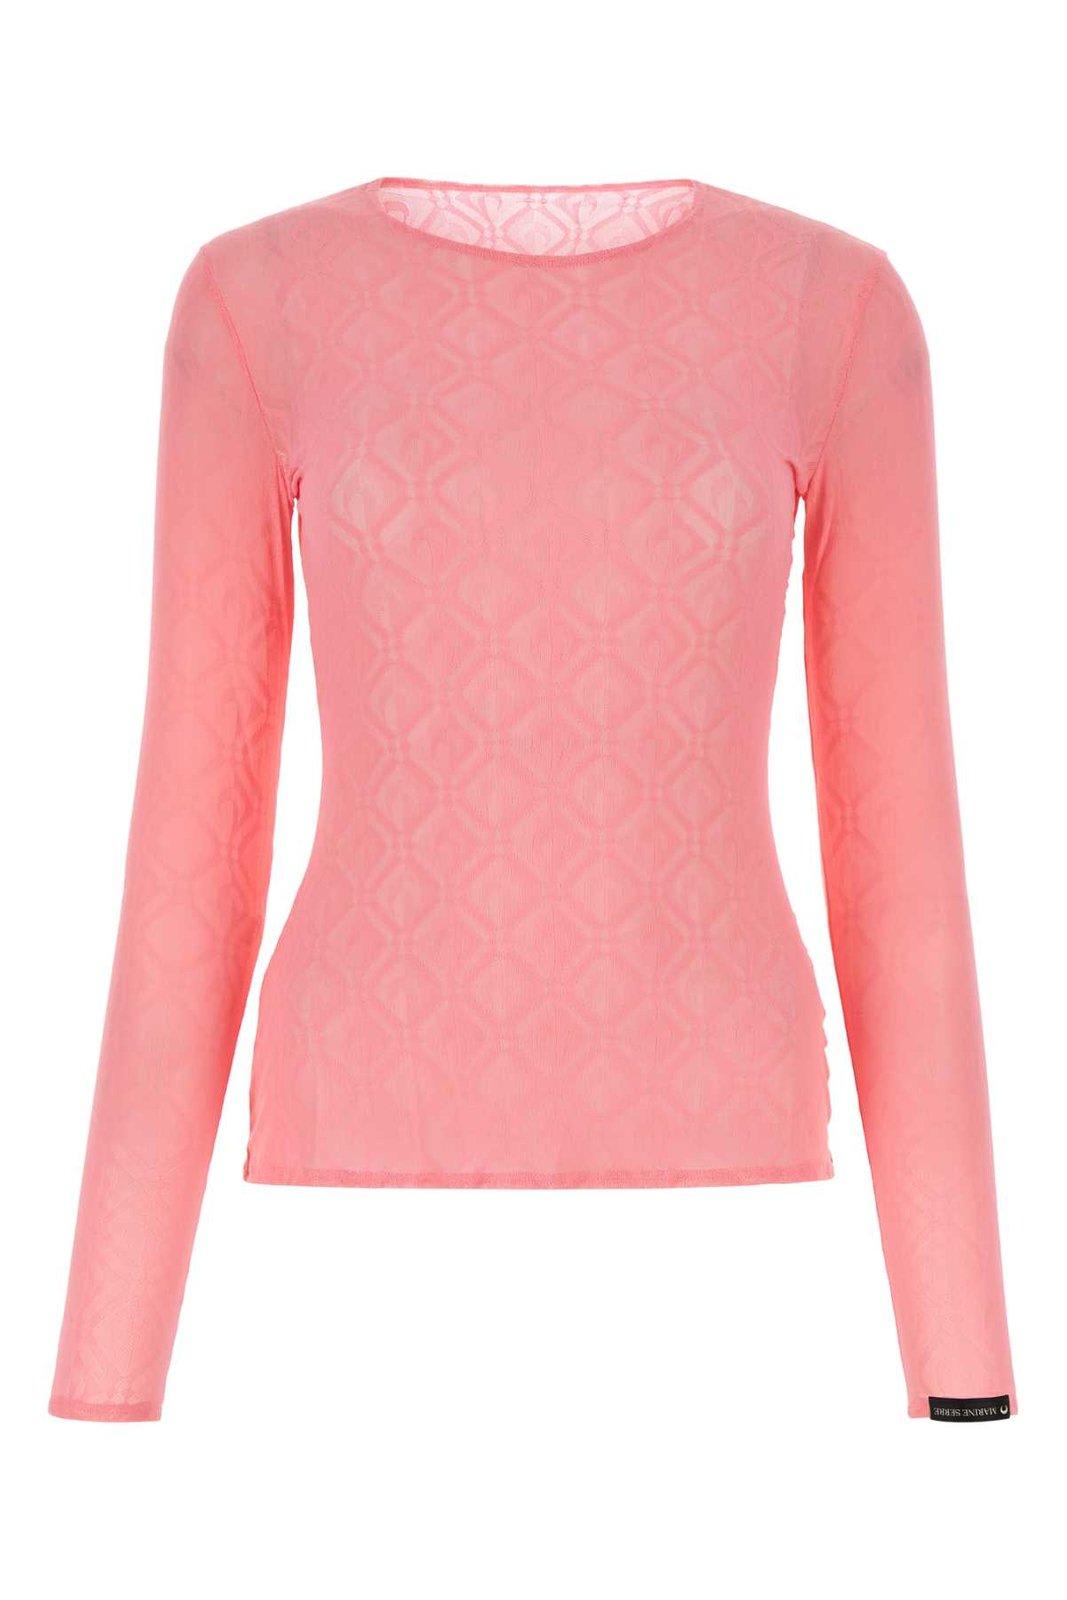 Shop Marine Serre Crescent Moon Long Sleeved Top In Pink